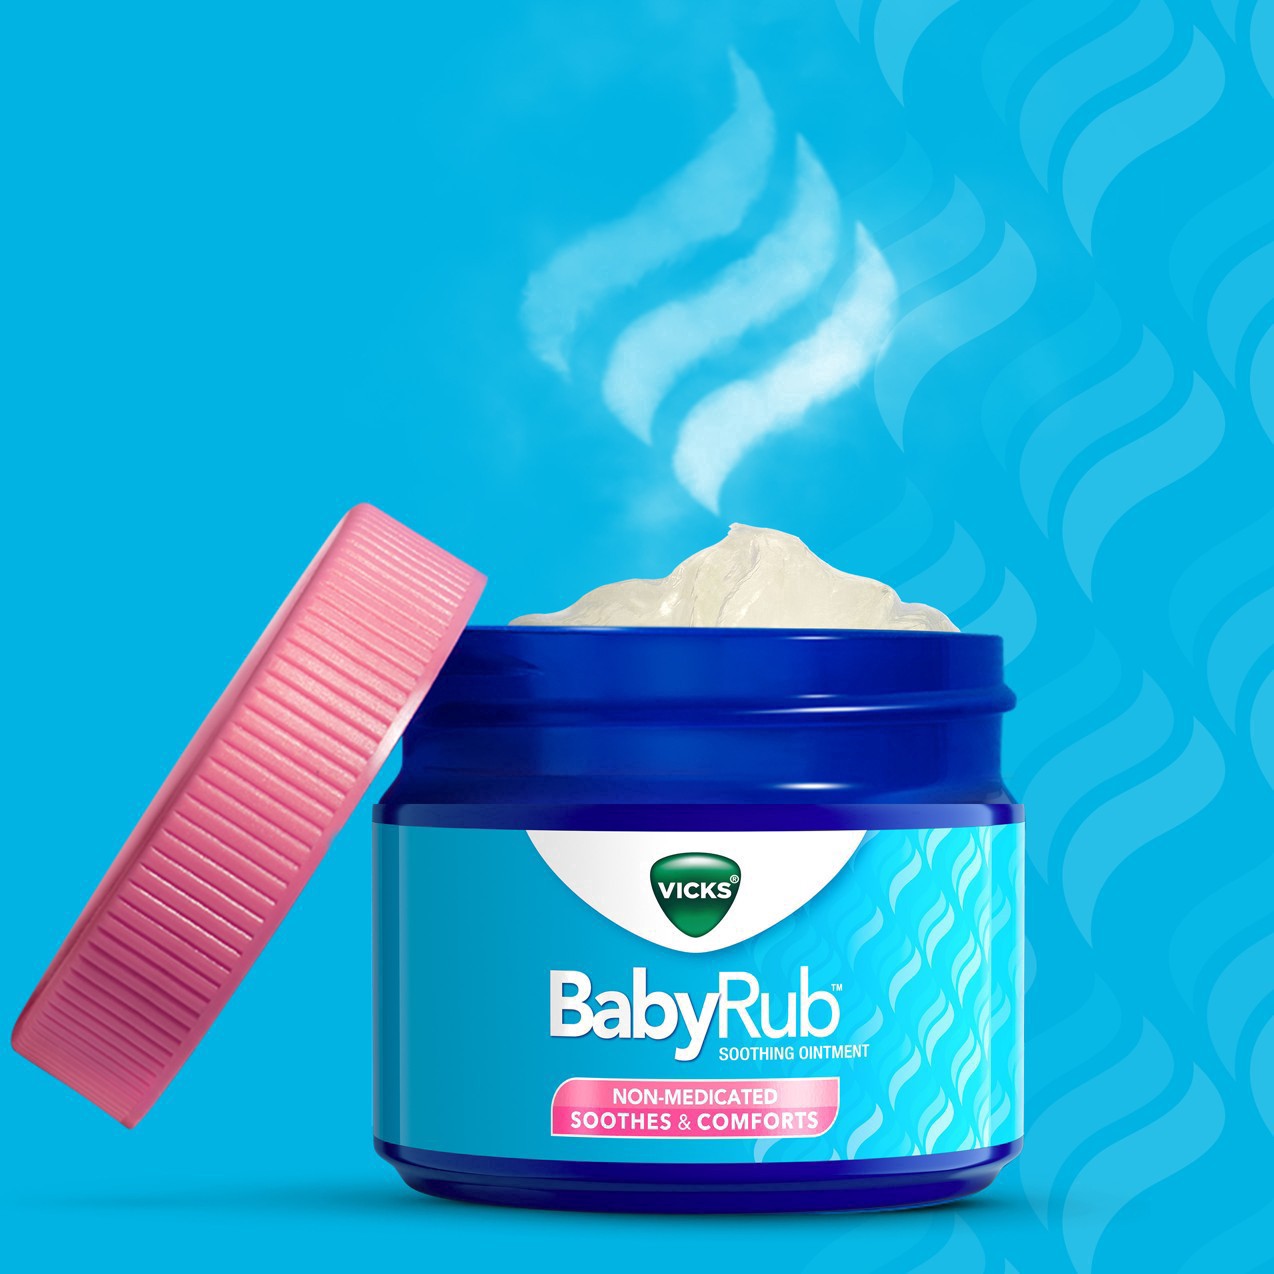 slide 2 of 78, Vicks BabyRub, Chest Rub Ointment with Soothing Aloe, Eucalyptus, Lavender, and Rosemary, from The Makers of VapoRub, 1.76 oz, 1.76 oz